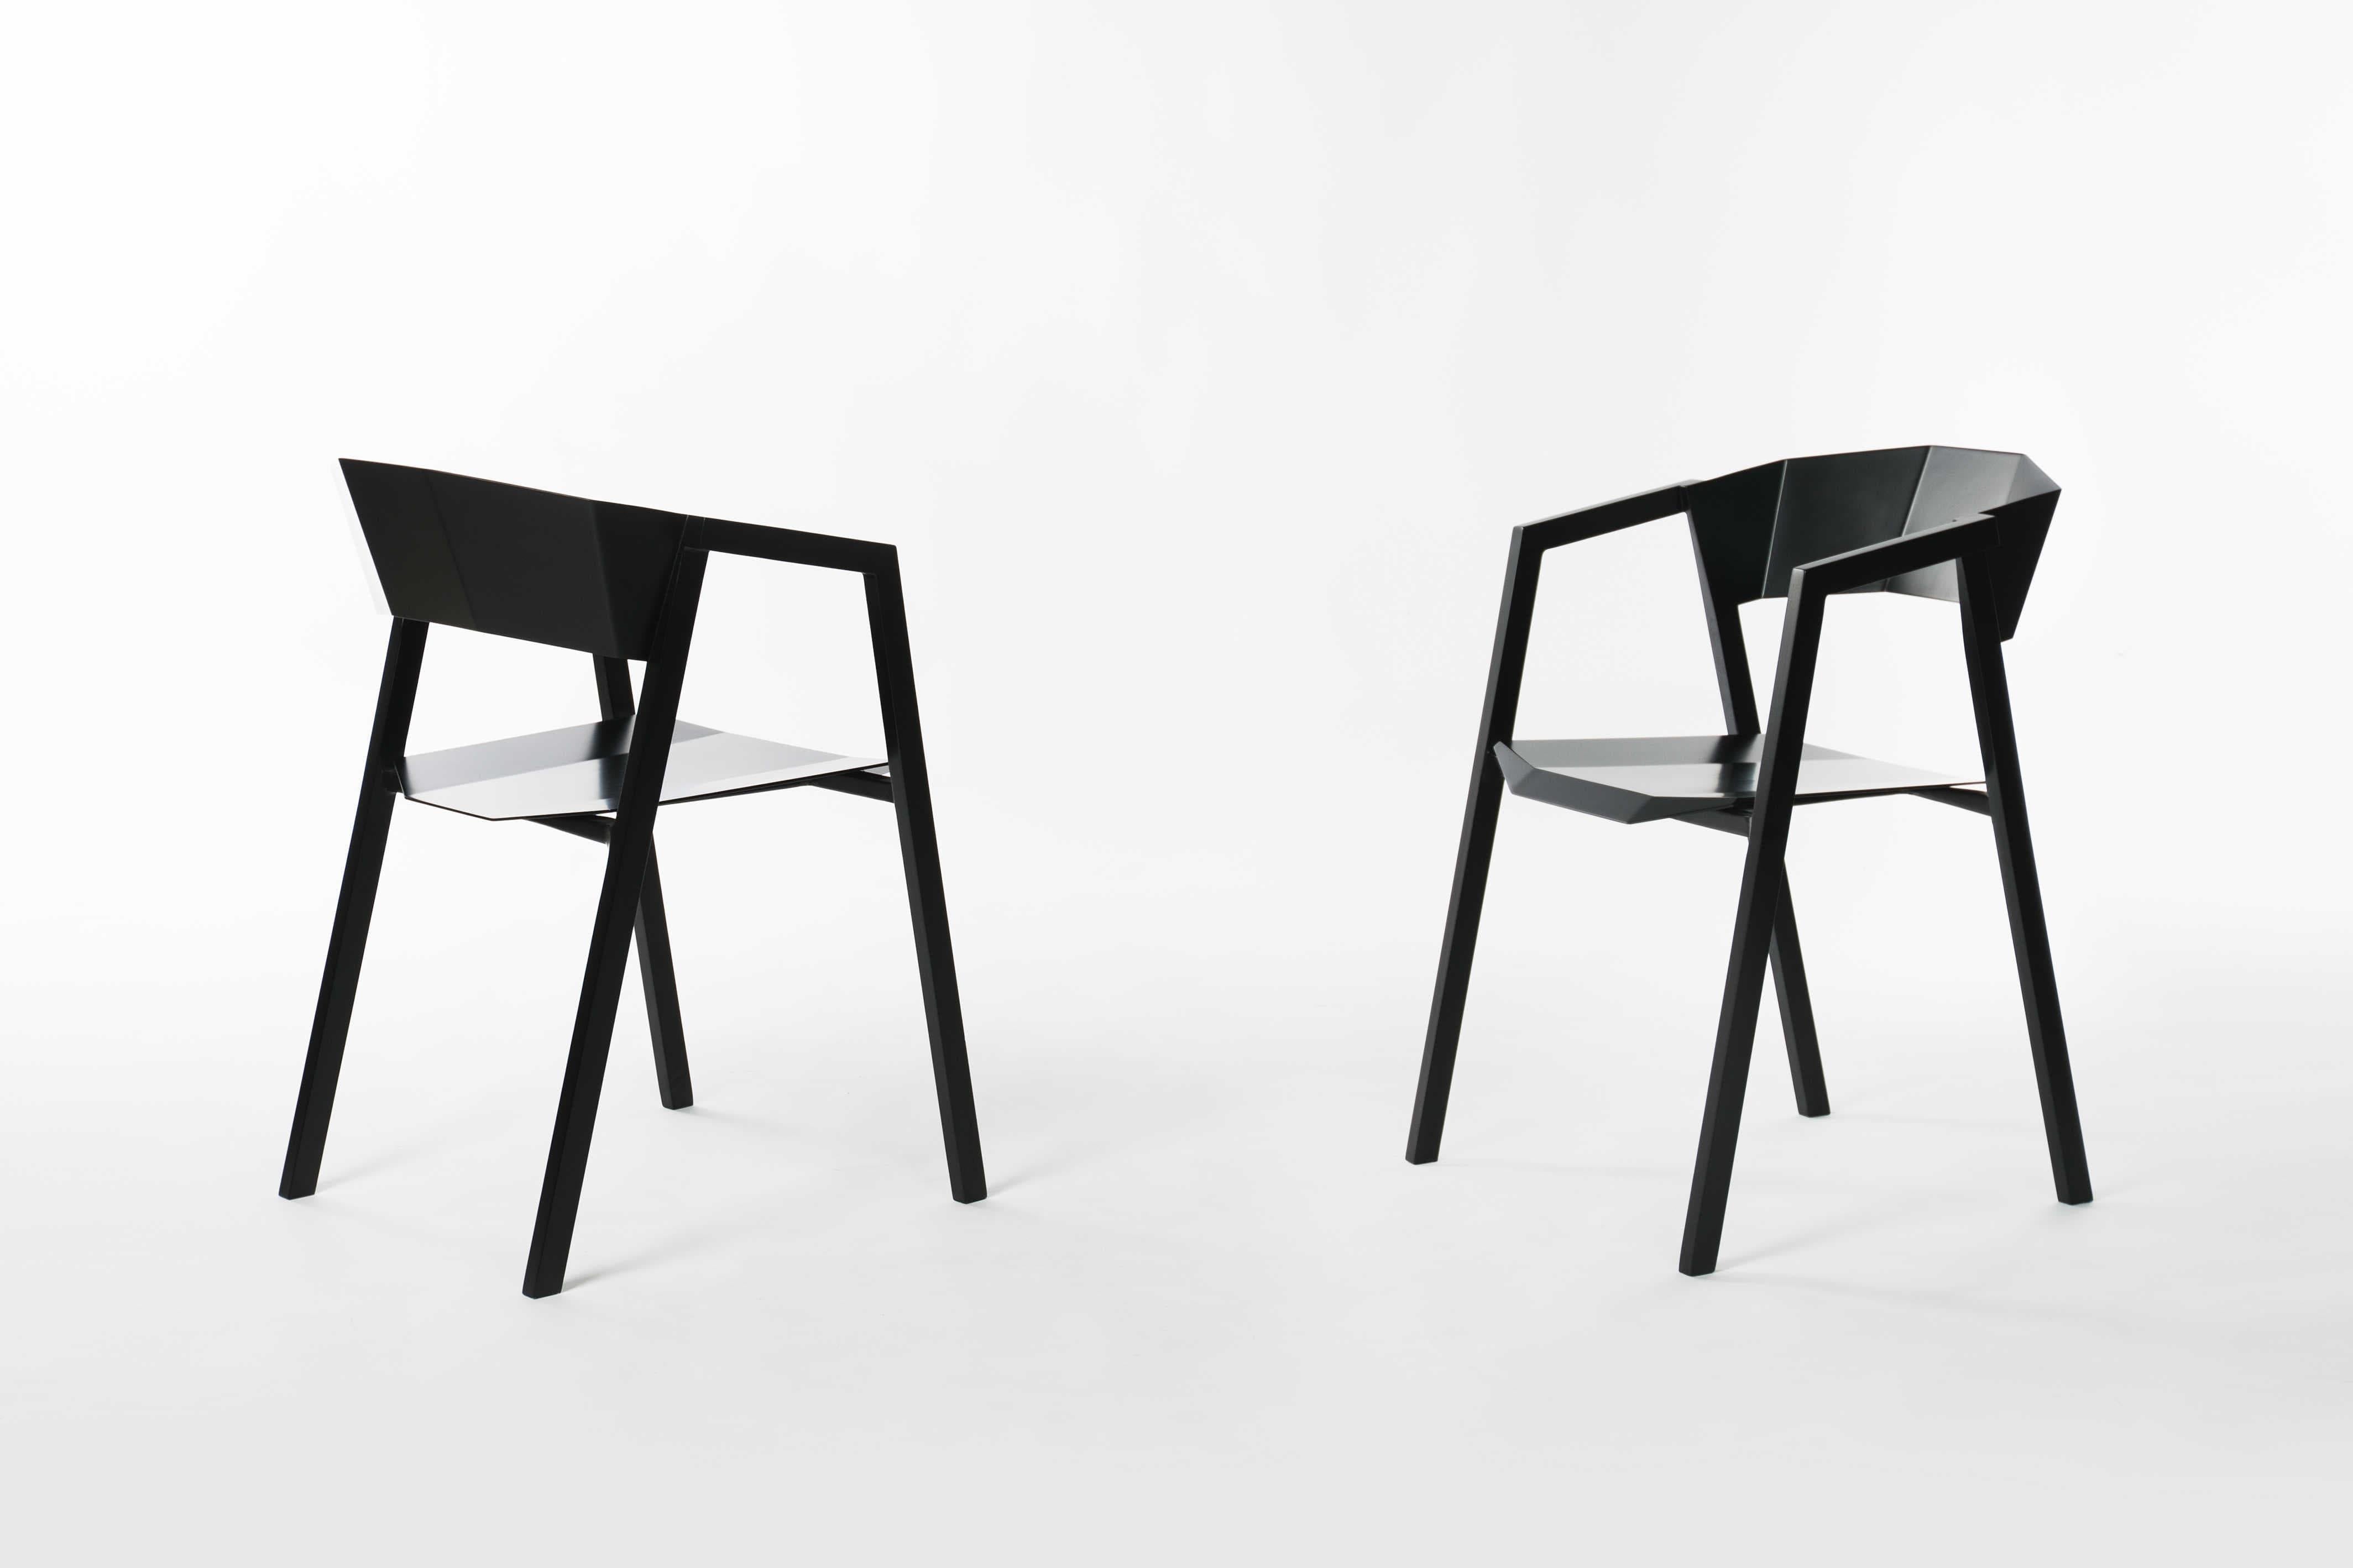 'K' chair is a made of aluminium (black or white)
by Bentu Design

Dimensions: H 75.2cm x 52 x 48 cm


Bentu Design's furniture derives its uniqueness from the simplicity of its forms and its materials. Designed and manufactured by the designers of